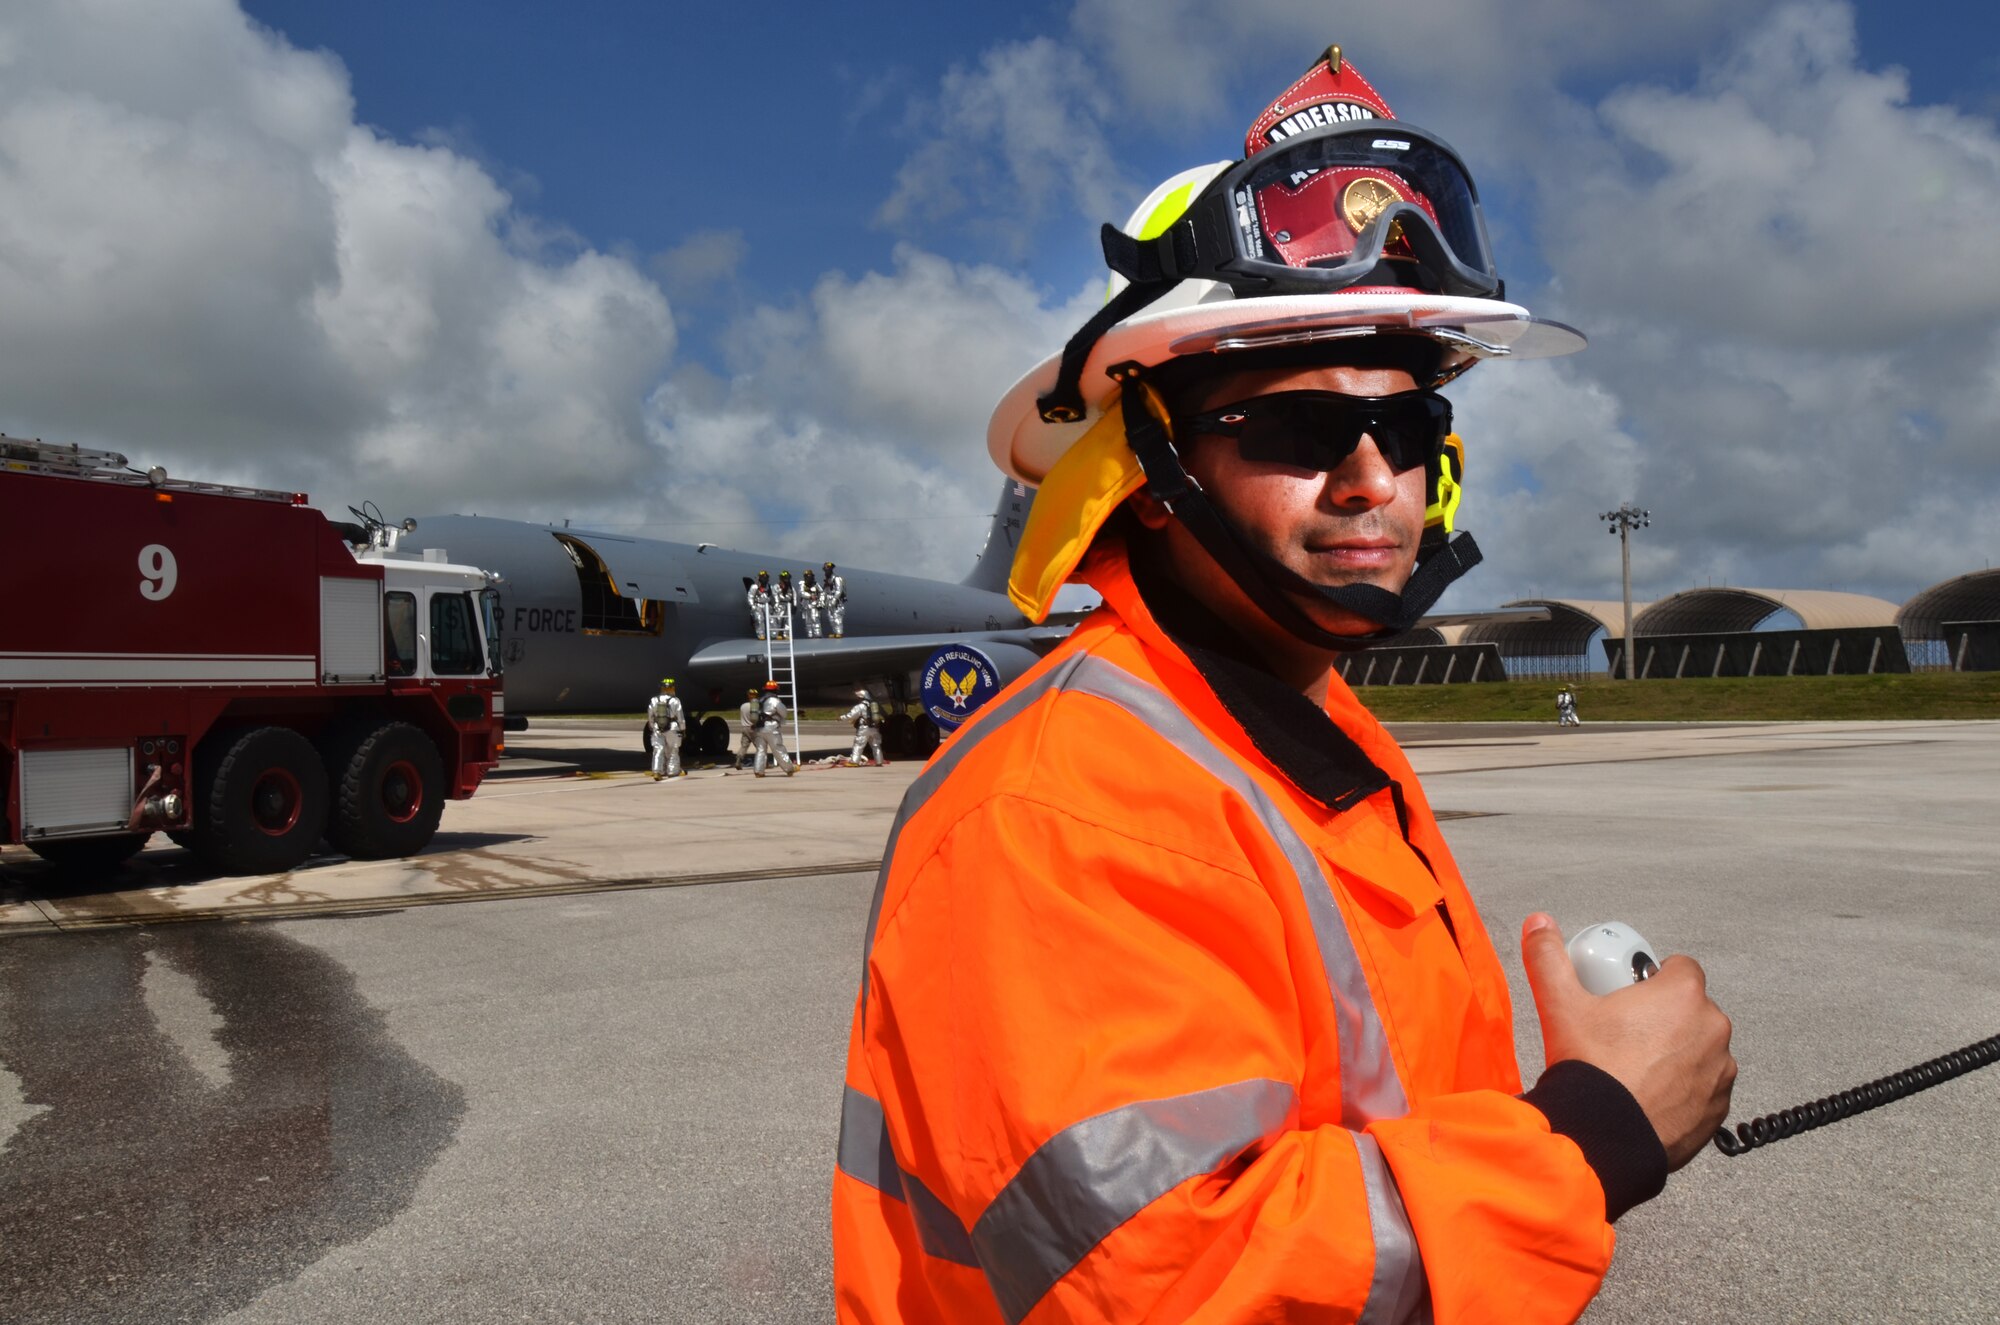 Master Sgt. Essam Cordova, 36th Civil Engineer Squadron Fire and Emergency Services assistant chief of operations during 2012, participates in an aircraft fire training exercise on Andersen Air Force Base, Guam, April, 4, 2013. Cordova was awarded Navy Fire and Emergency Services Military Fire Officer of the Year for 2012. (U.S. Air Force photo by Staff Sgt. Veronica McMahon/Released)